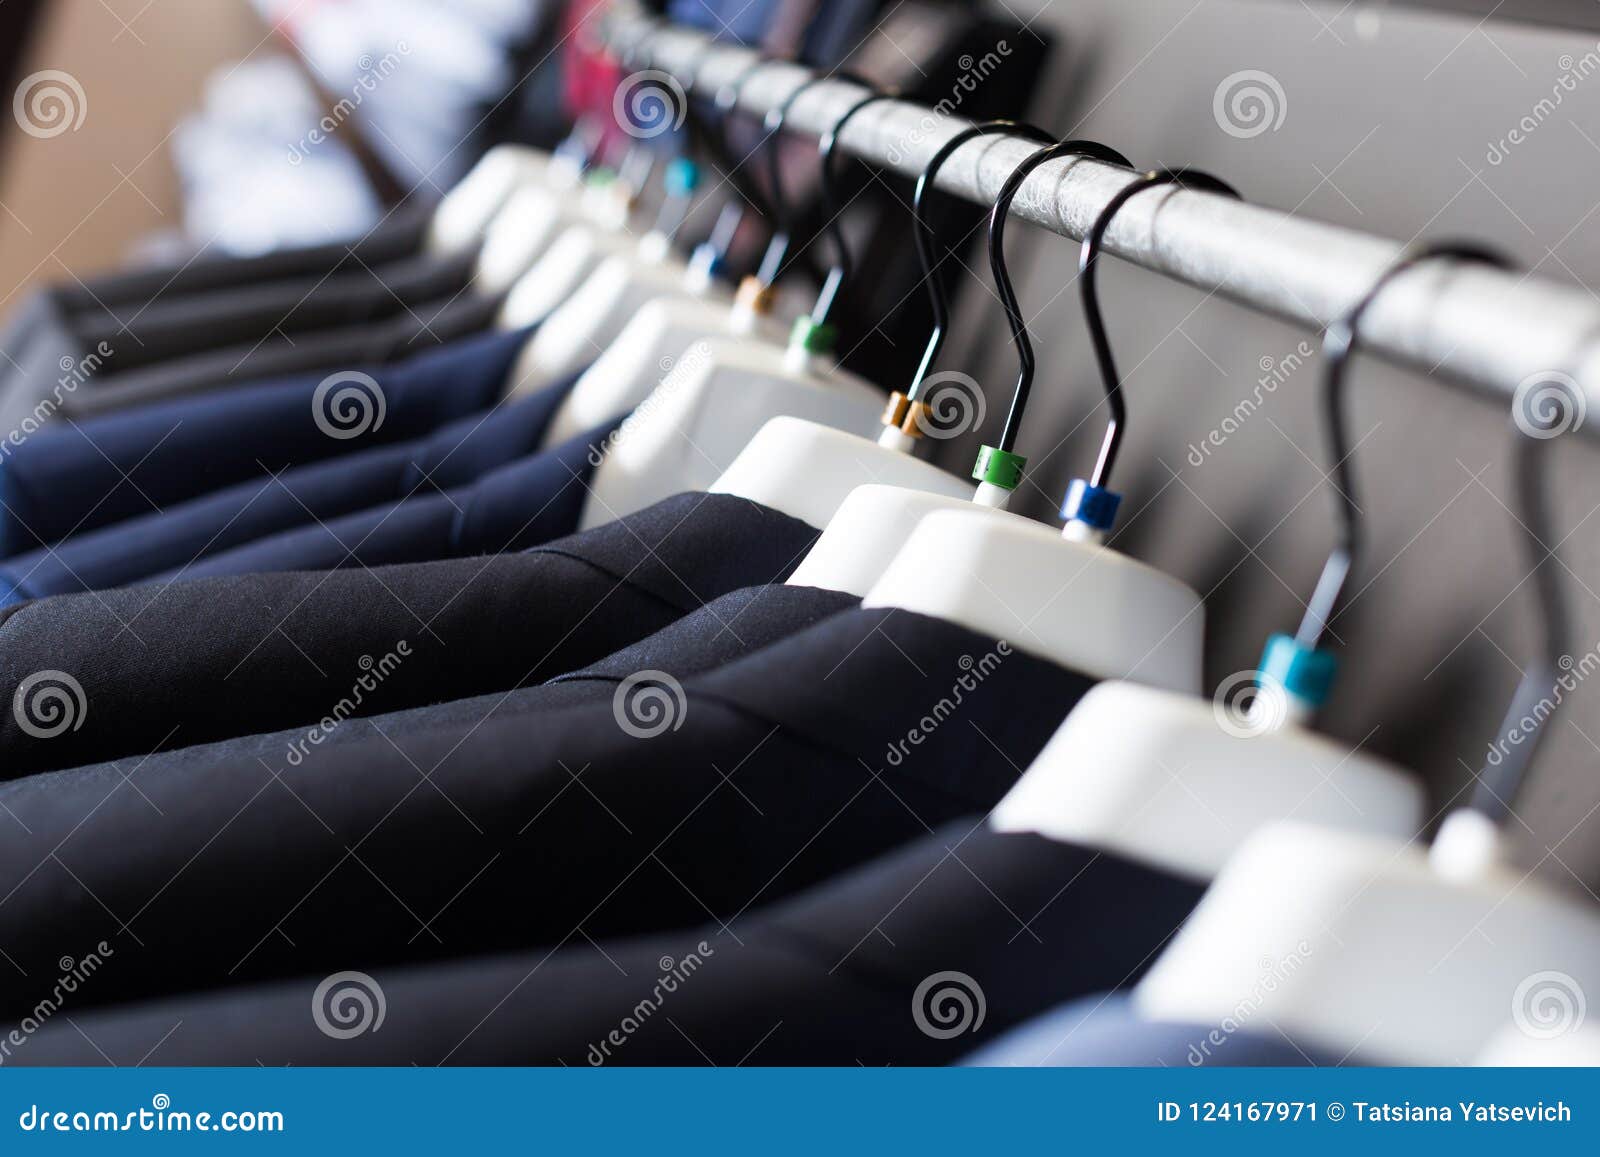 Row of Jackets on Hangers in Men Boutique Stock Image - Image of market ...